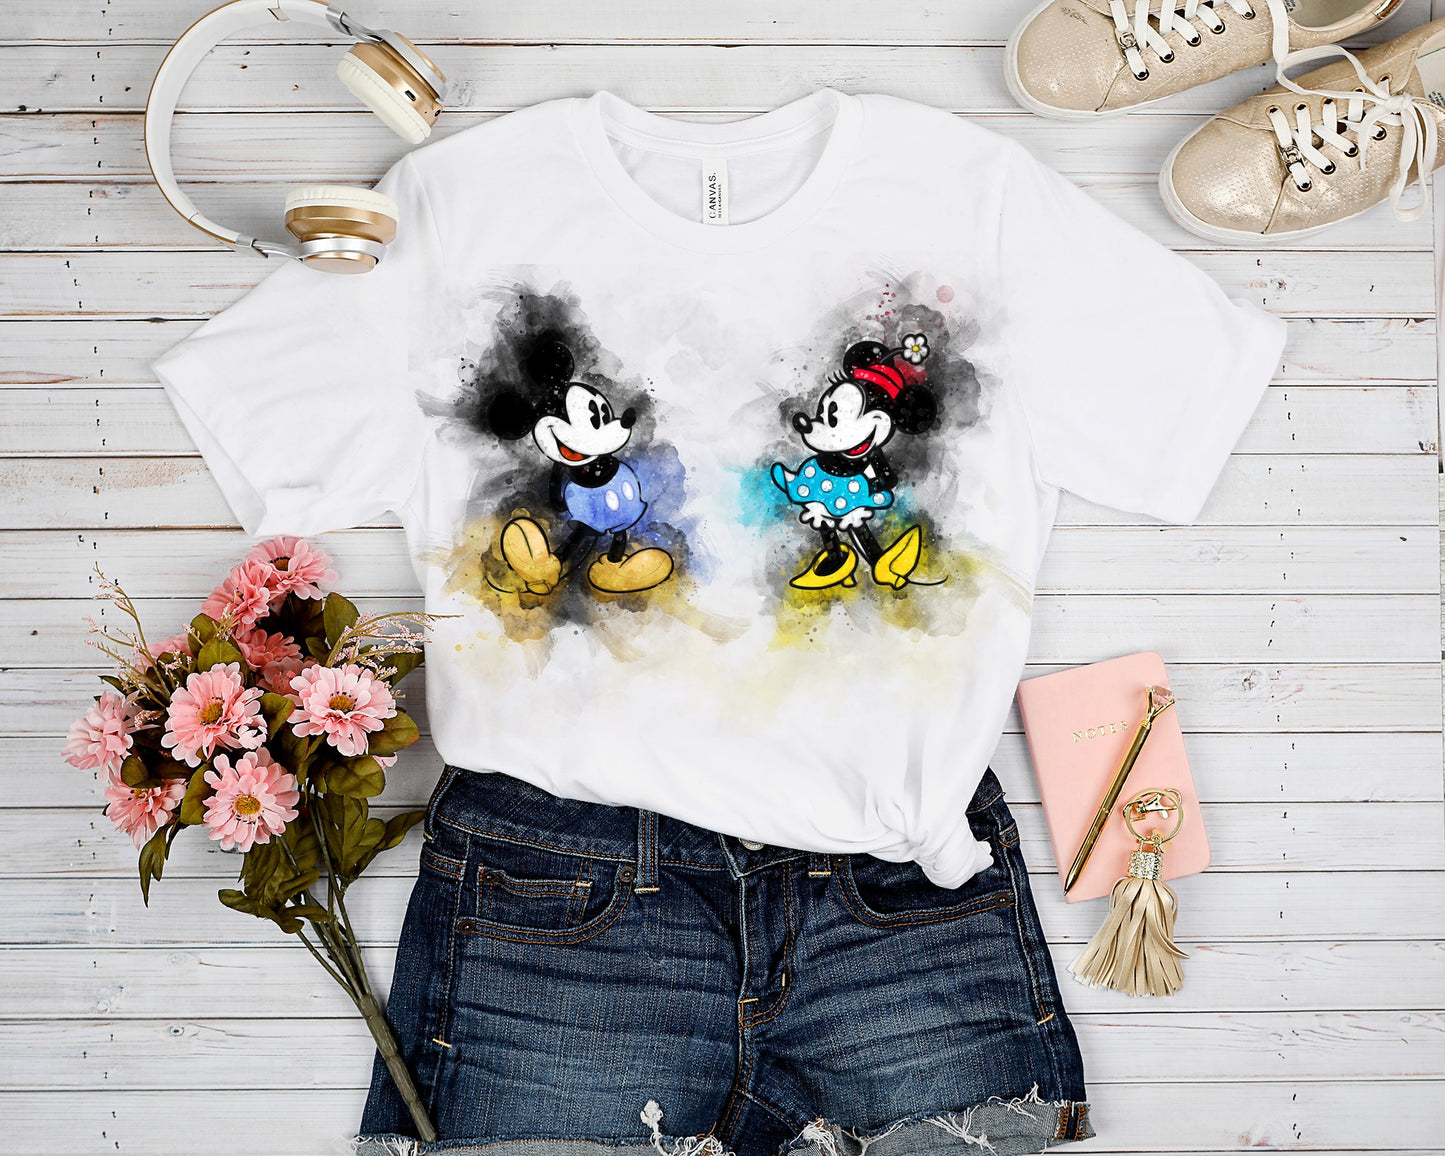 OUTFIT 6-SPLATTER MOUSE TEE